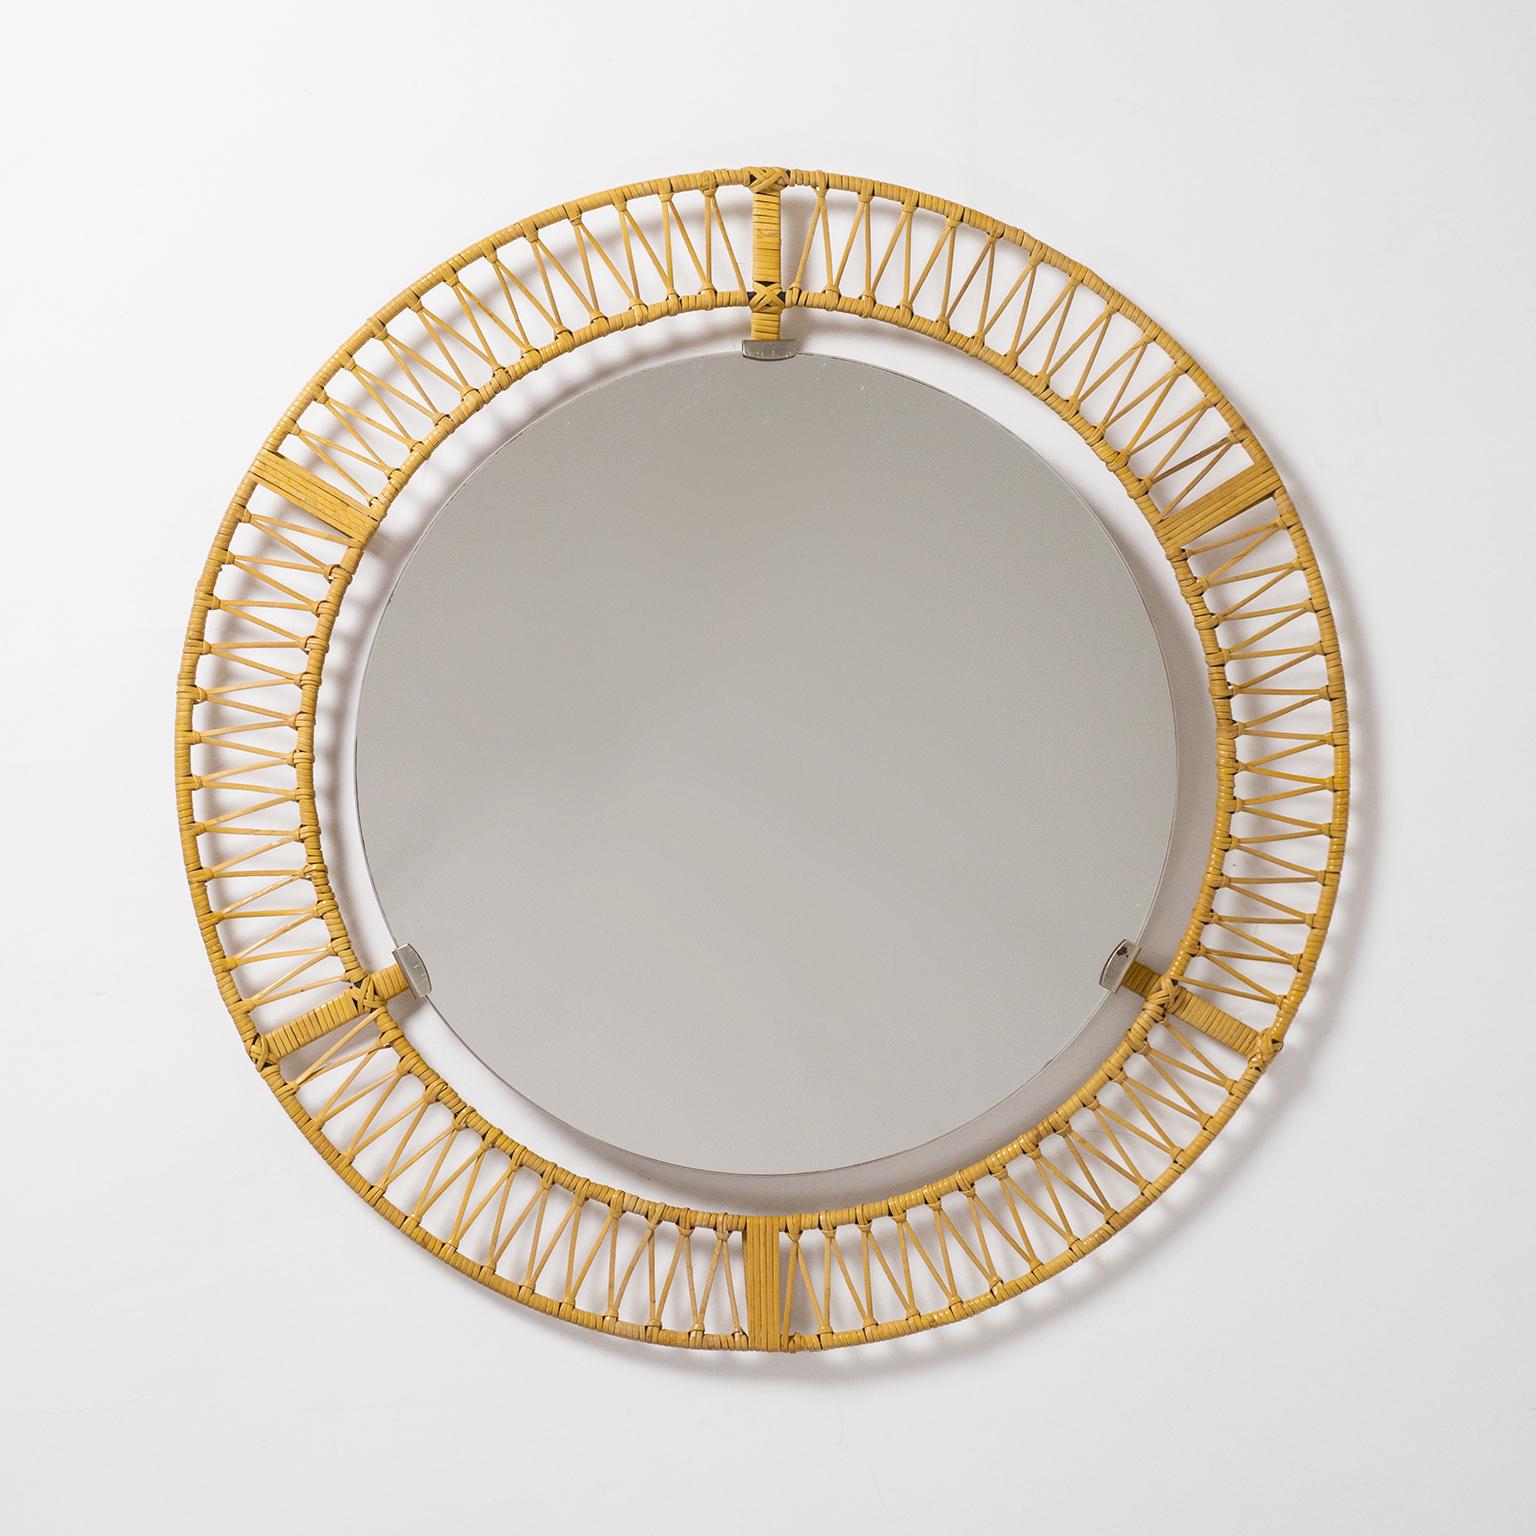 Rare midcentury rattan mirror, circa 1960. Two concentric steel 'circles' wrapped and woven with rattan or wicker. The original mirror is held by three nickeled brackets in a floating manner. Fine original condition with patina on the metal parts.